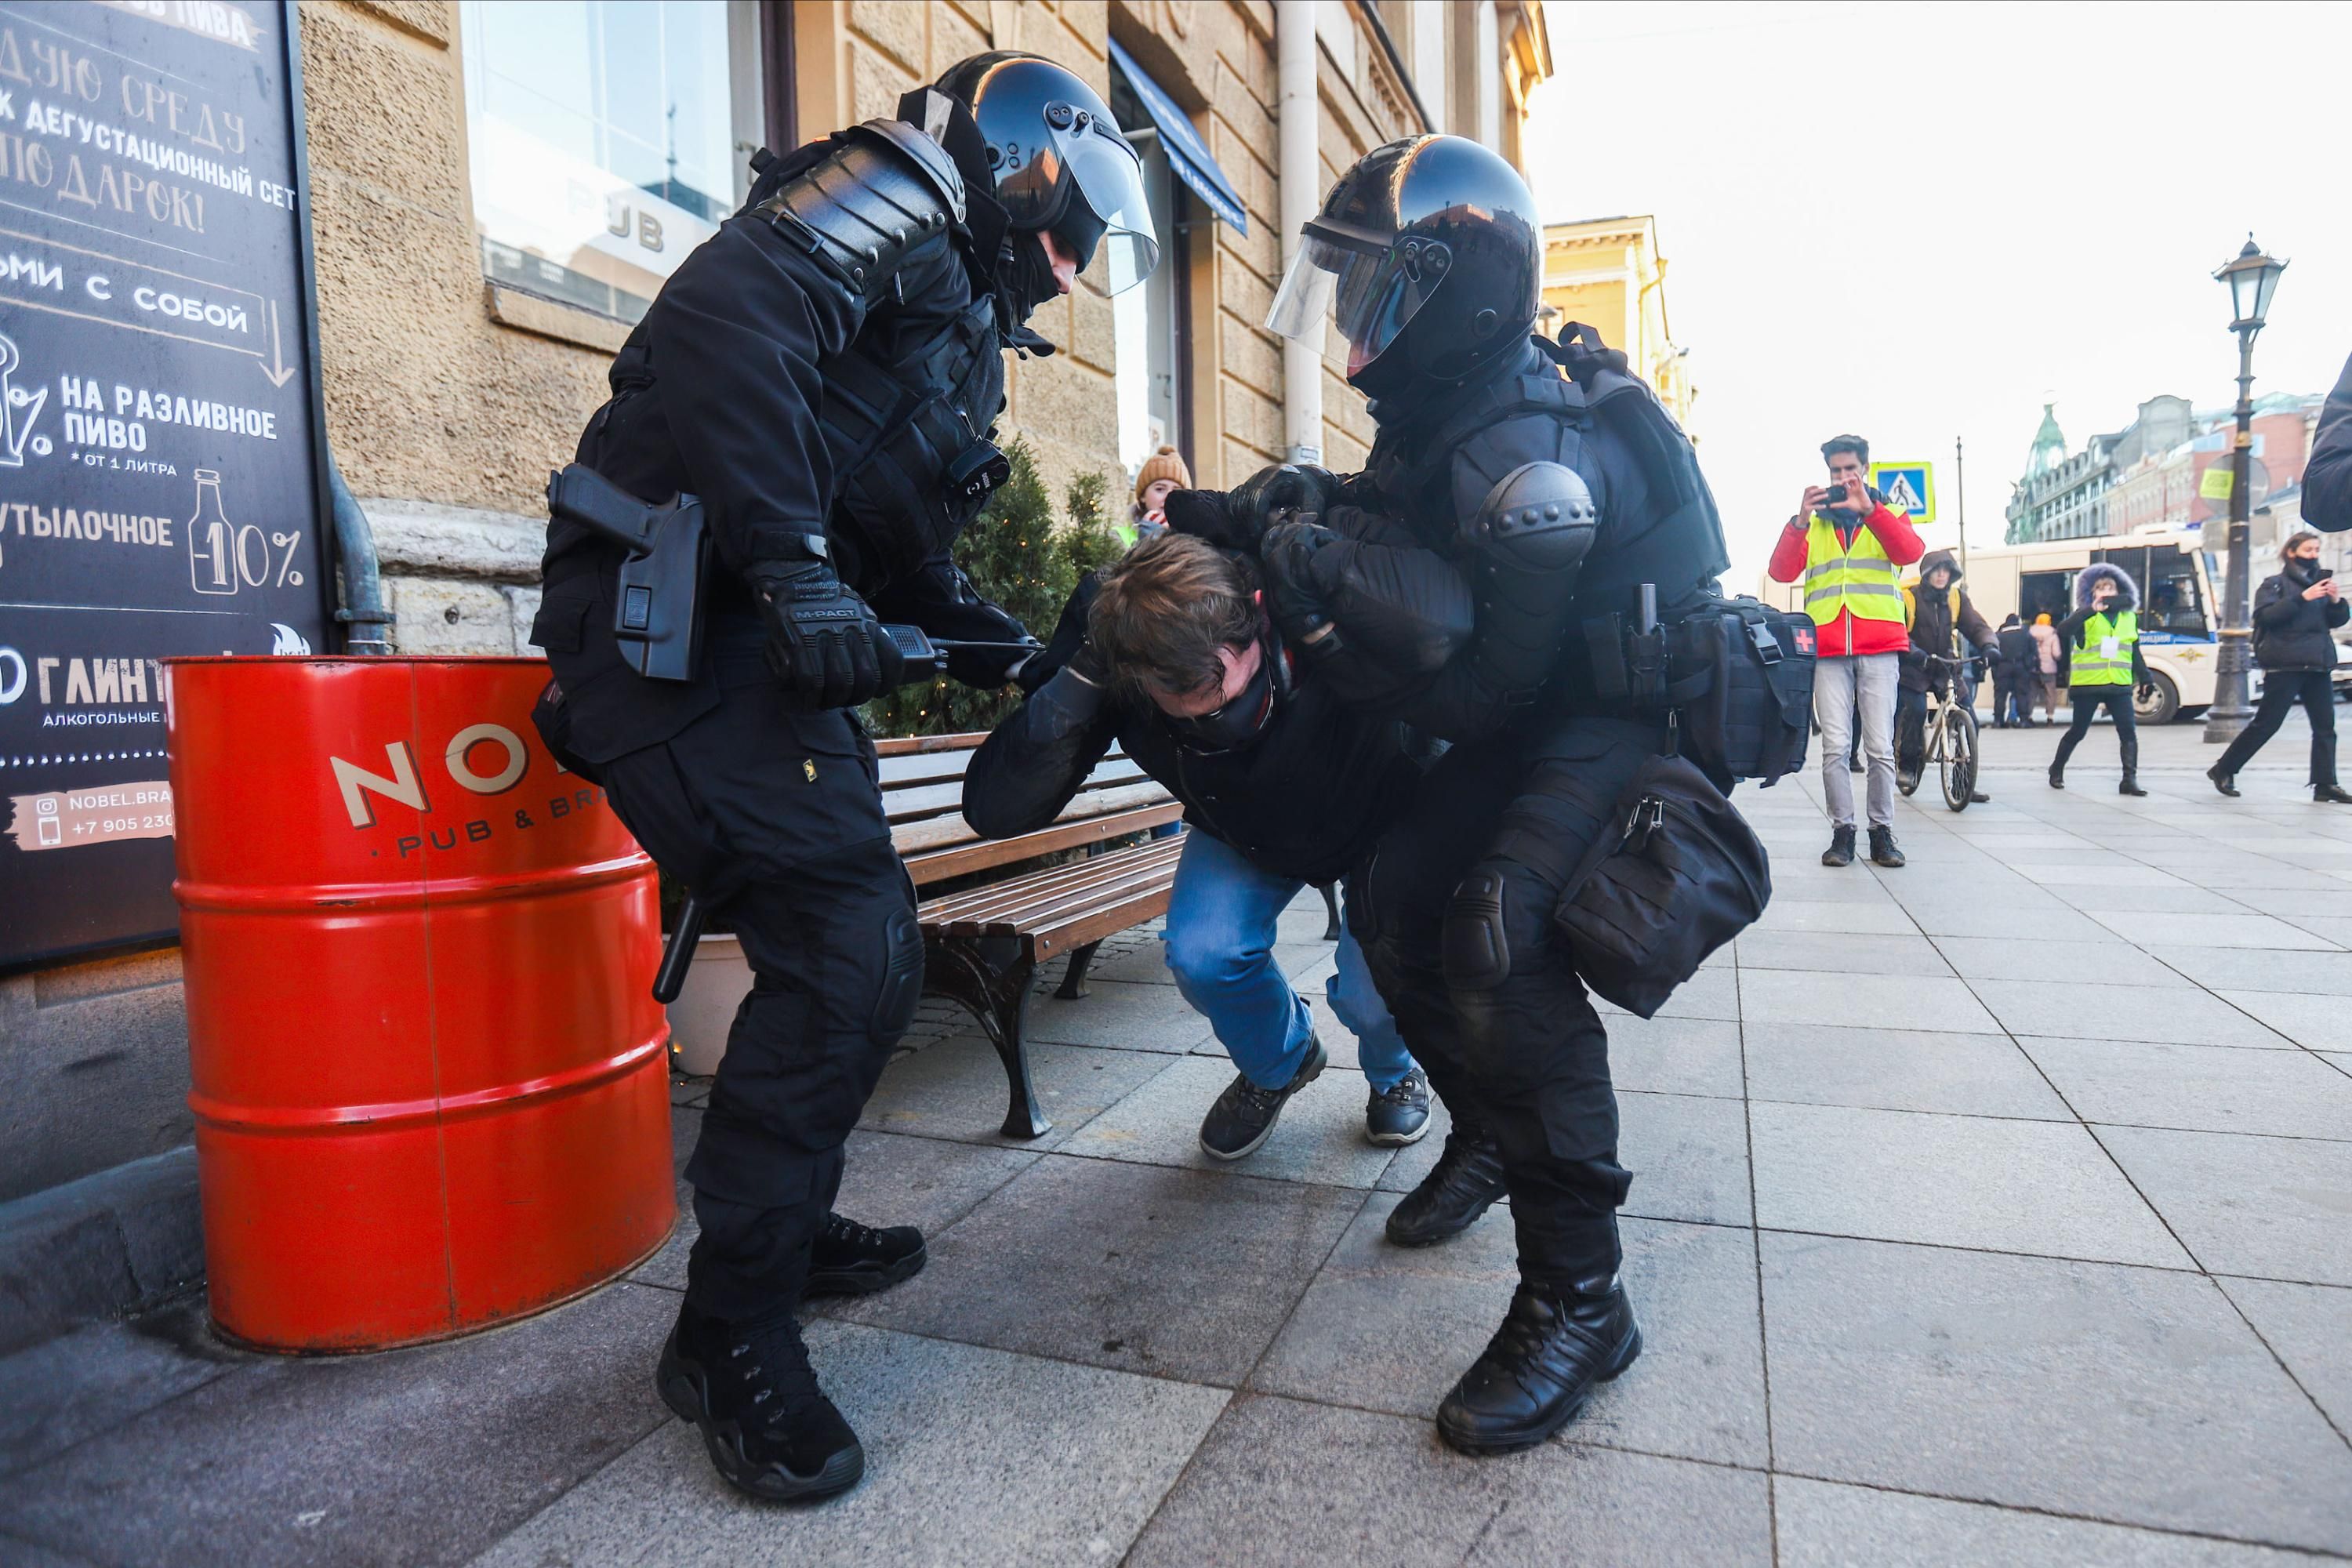 Russian police officers detain a protester